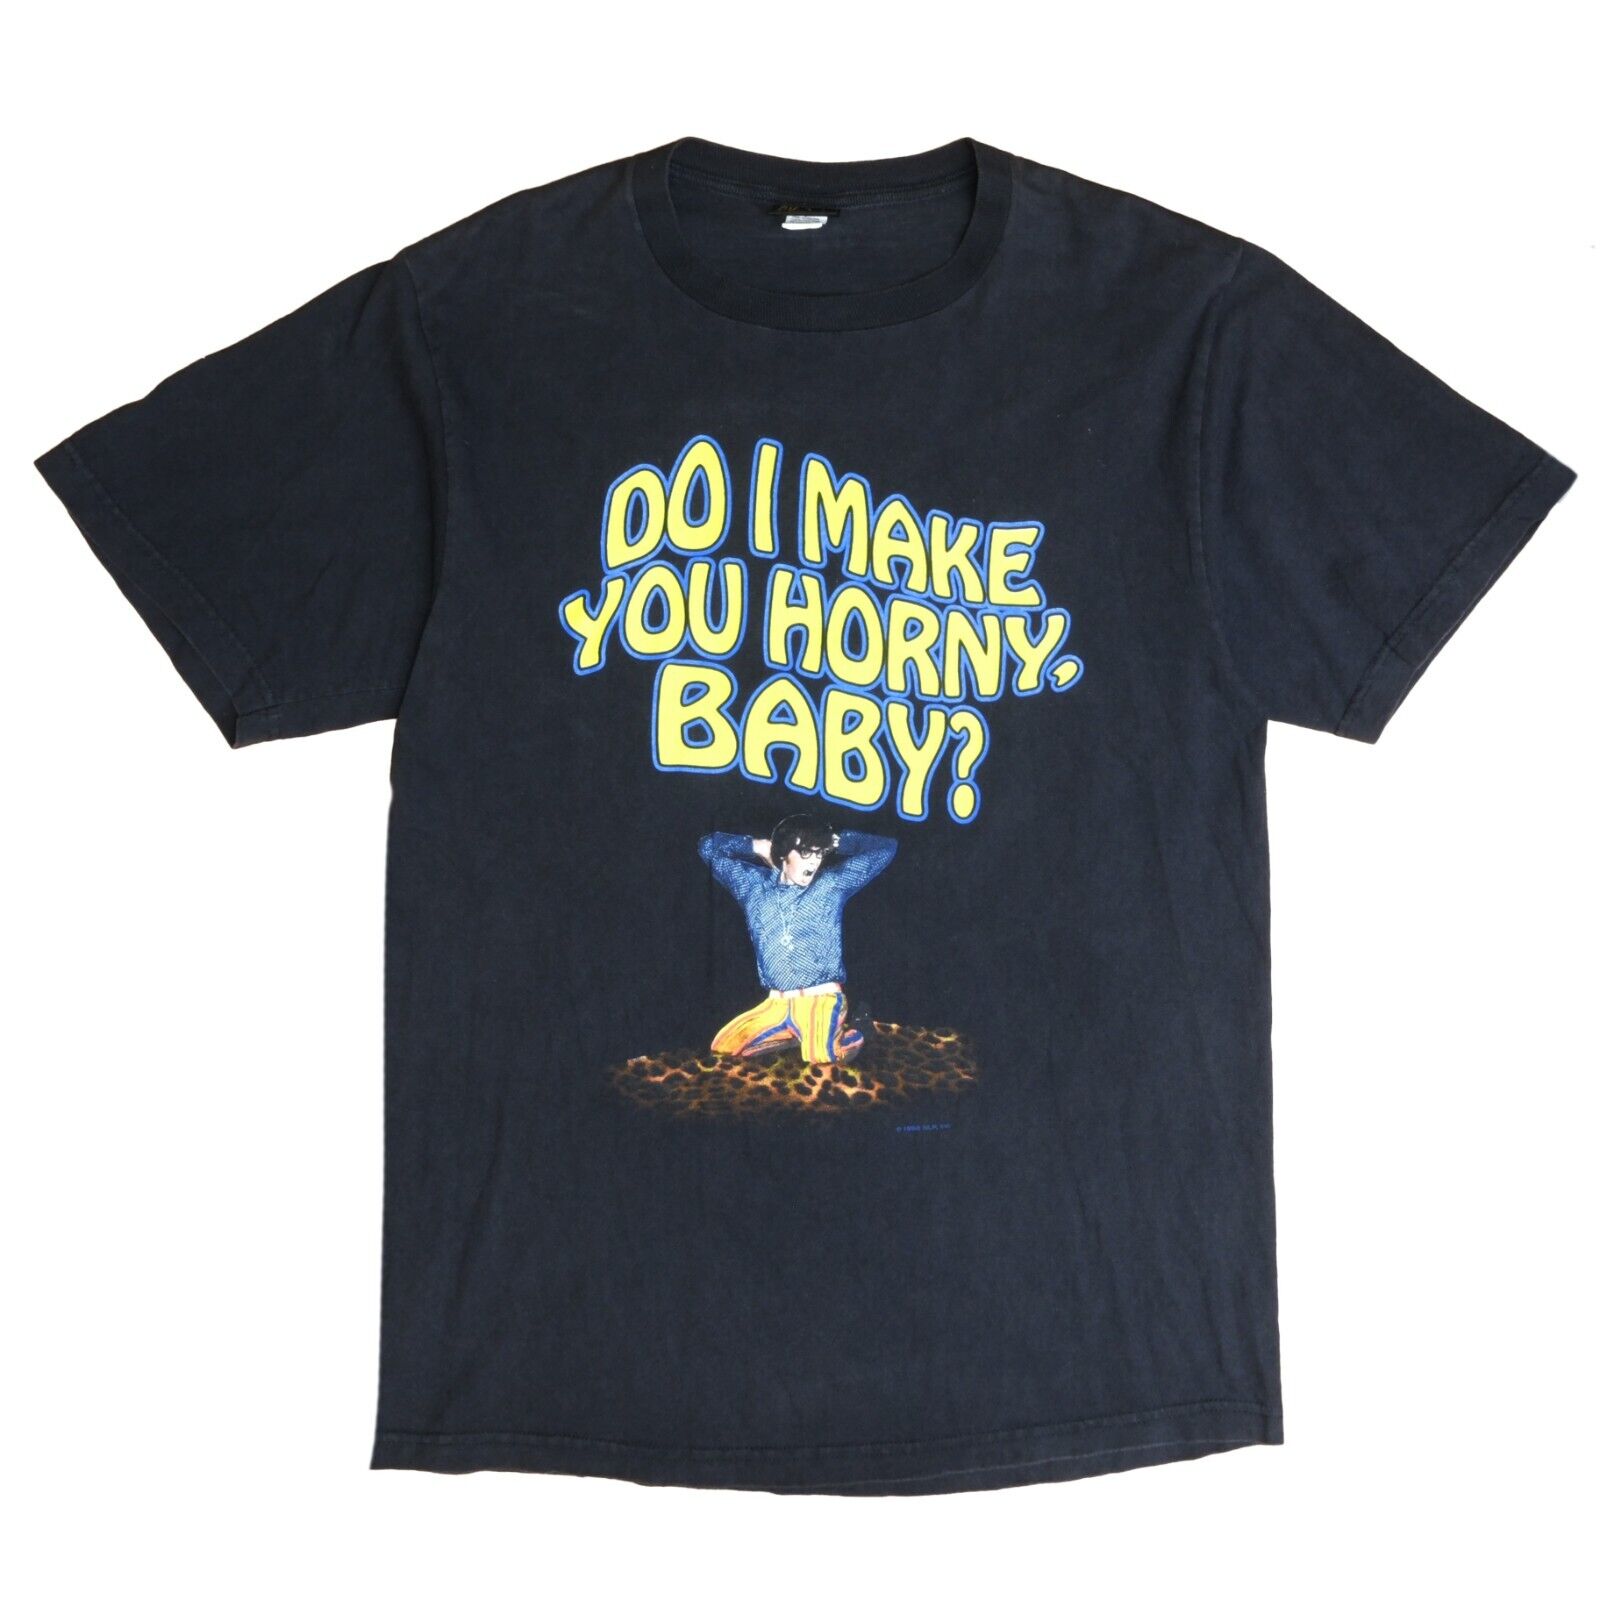 Vintage Austin Powers Do I Make Your Horny Baby T-Shirt Large Movie 1998 90s